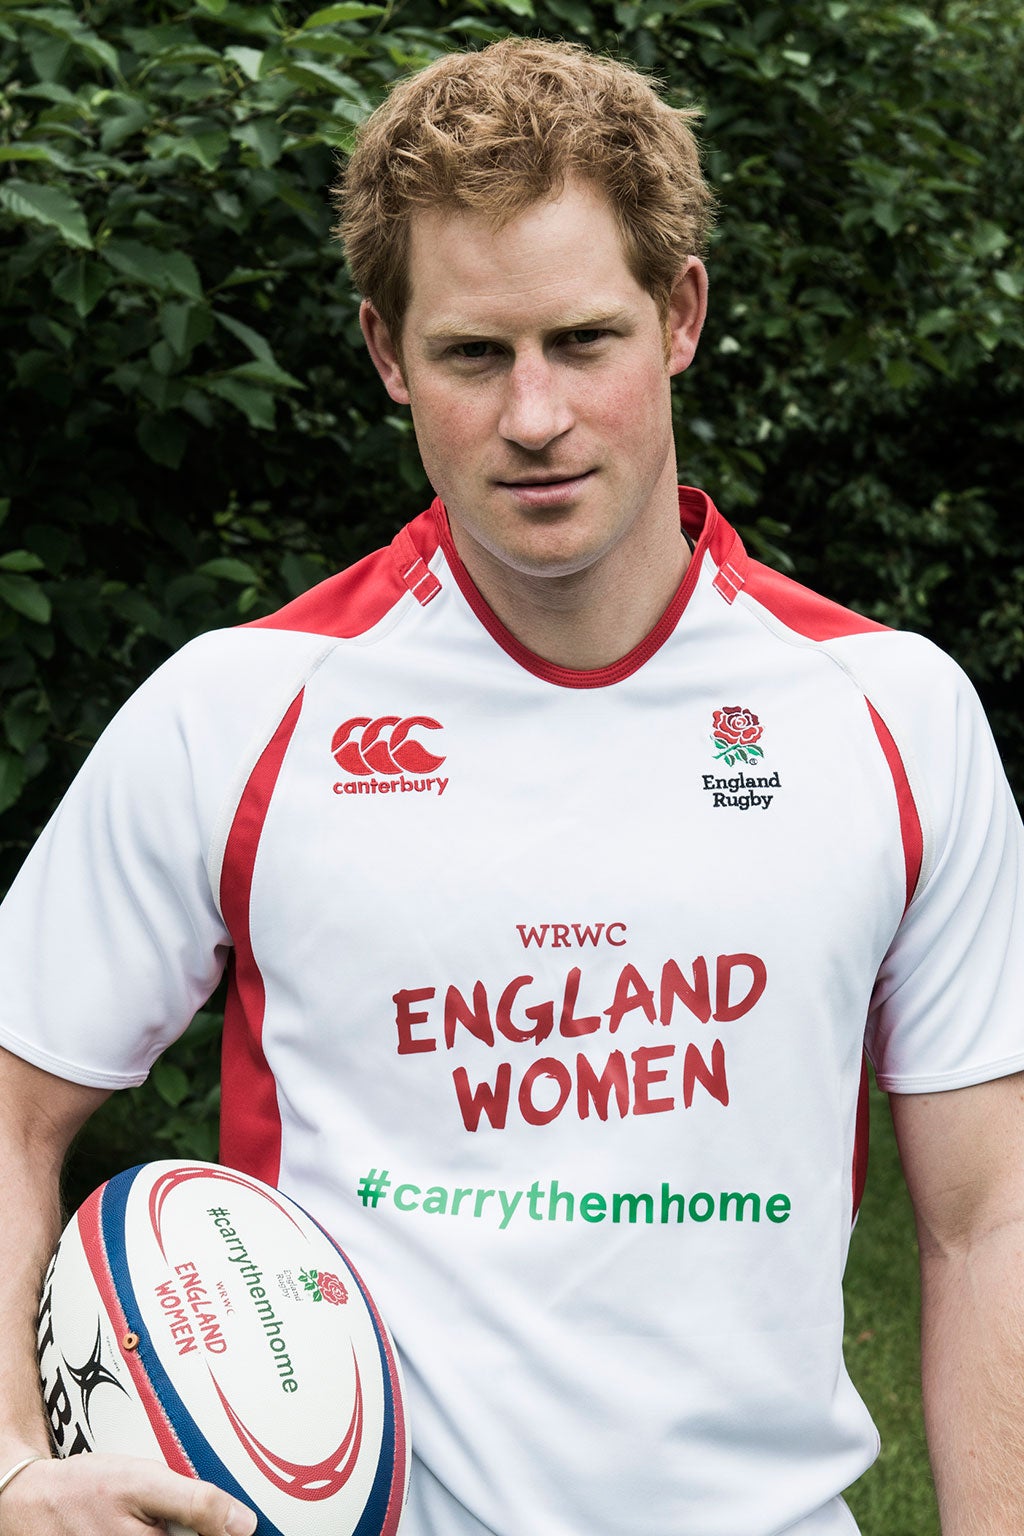 Prince Harry is supporting the England Women's side for the Women's Rugby World Cup